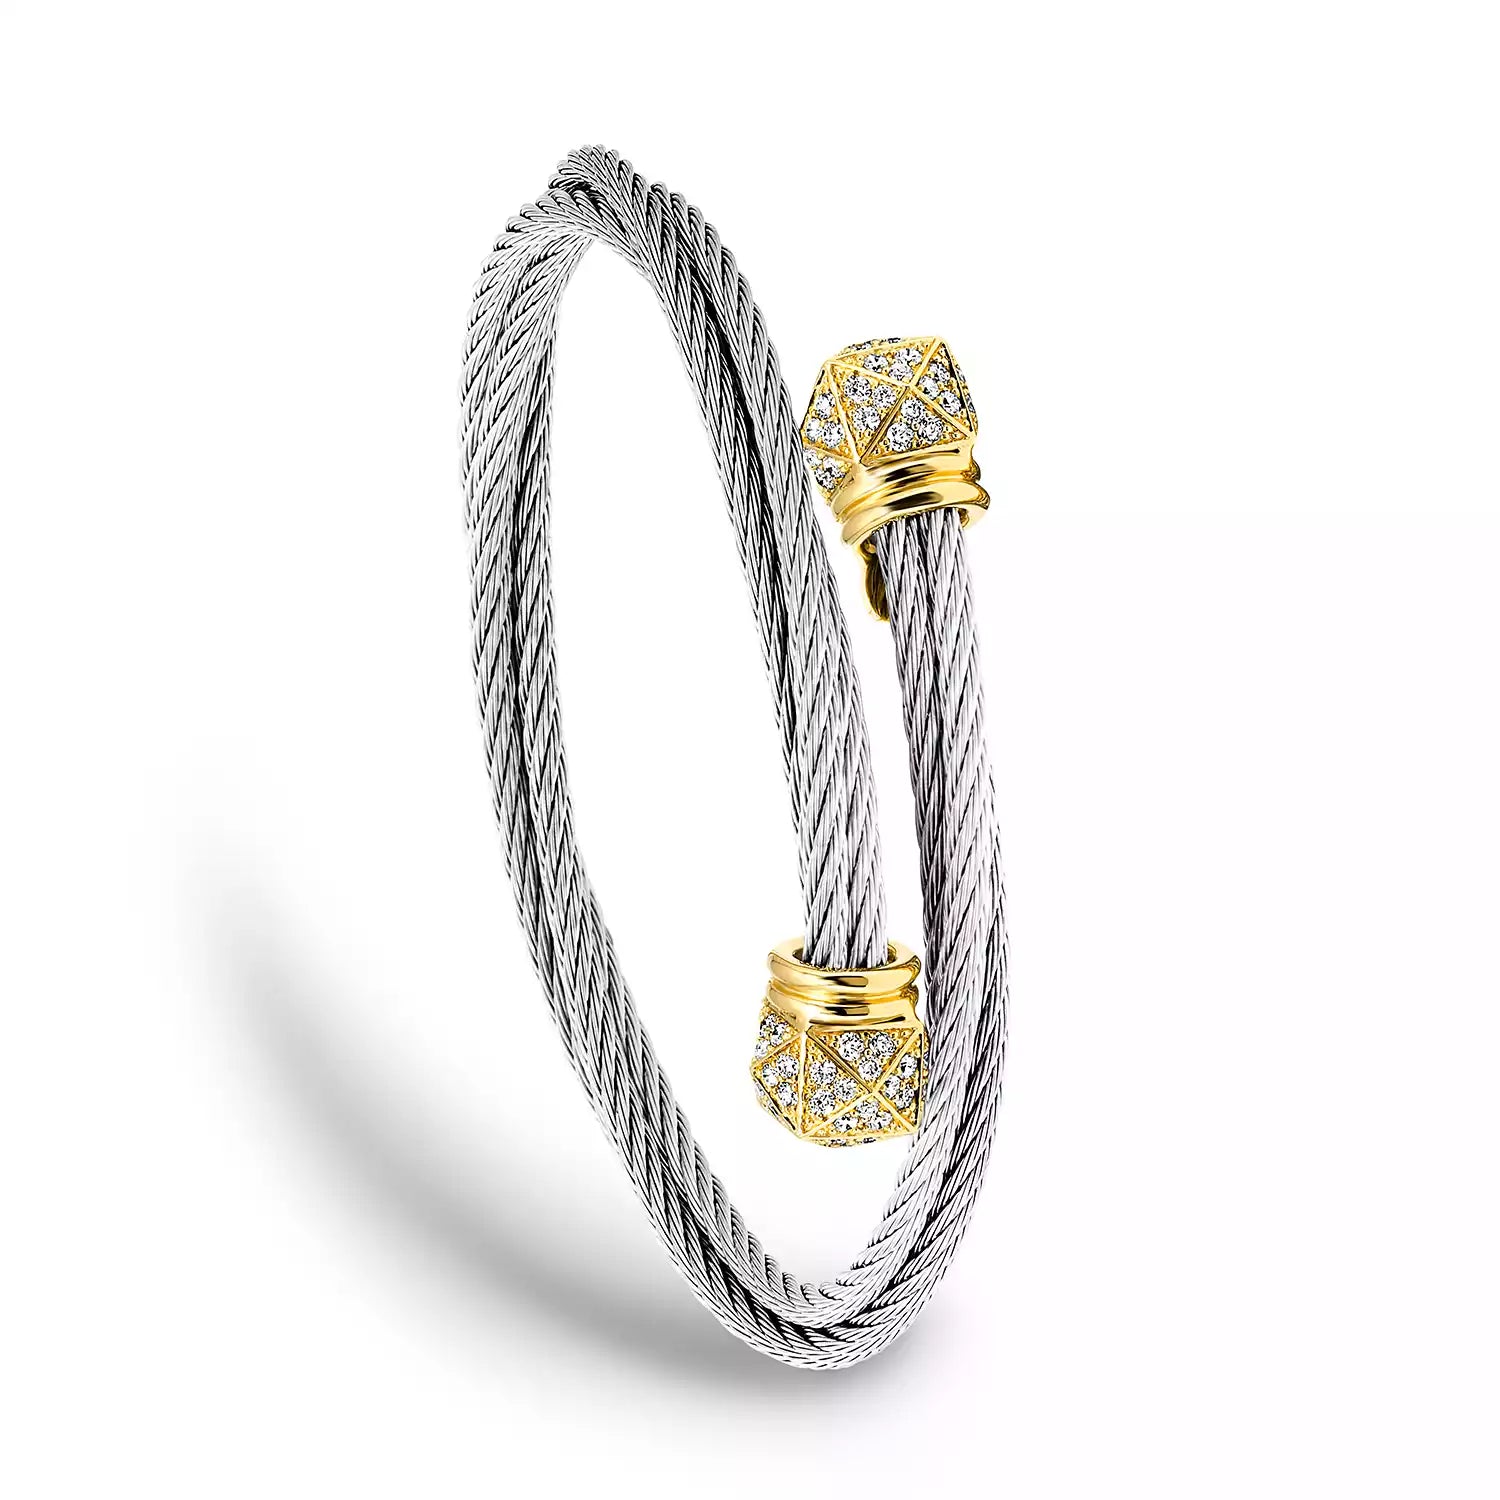 Steel_Gold 18KT with 120 Diamonds 1.60ct